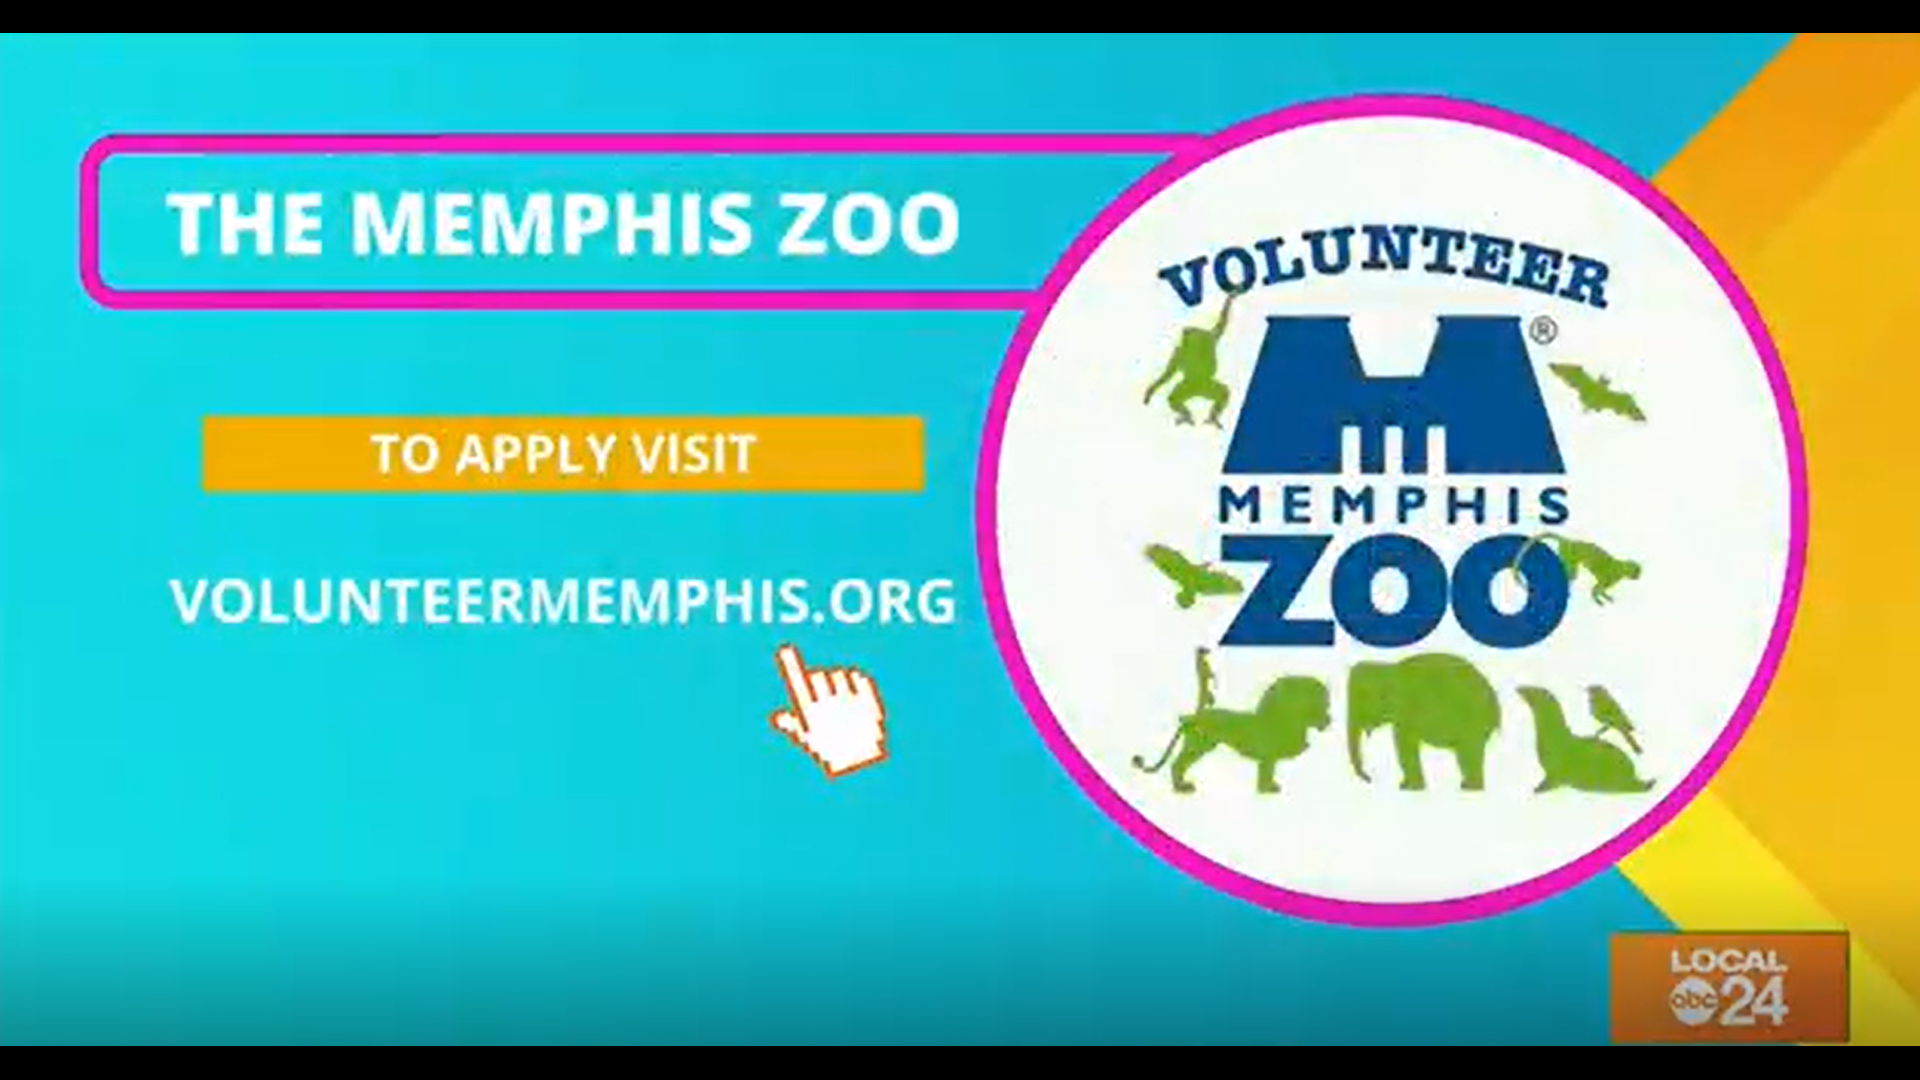 Calling all Memphis animal lovers! If you're looking to give back to the community and gain real life experience, check out what the Memphis Zoo has to offer!